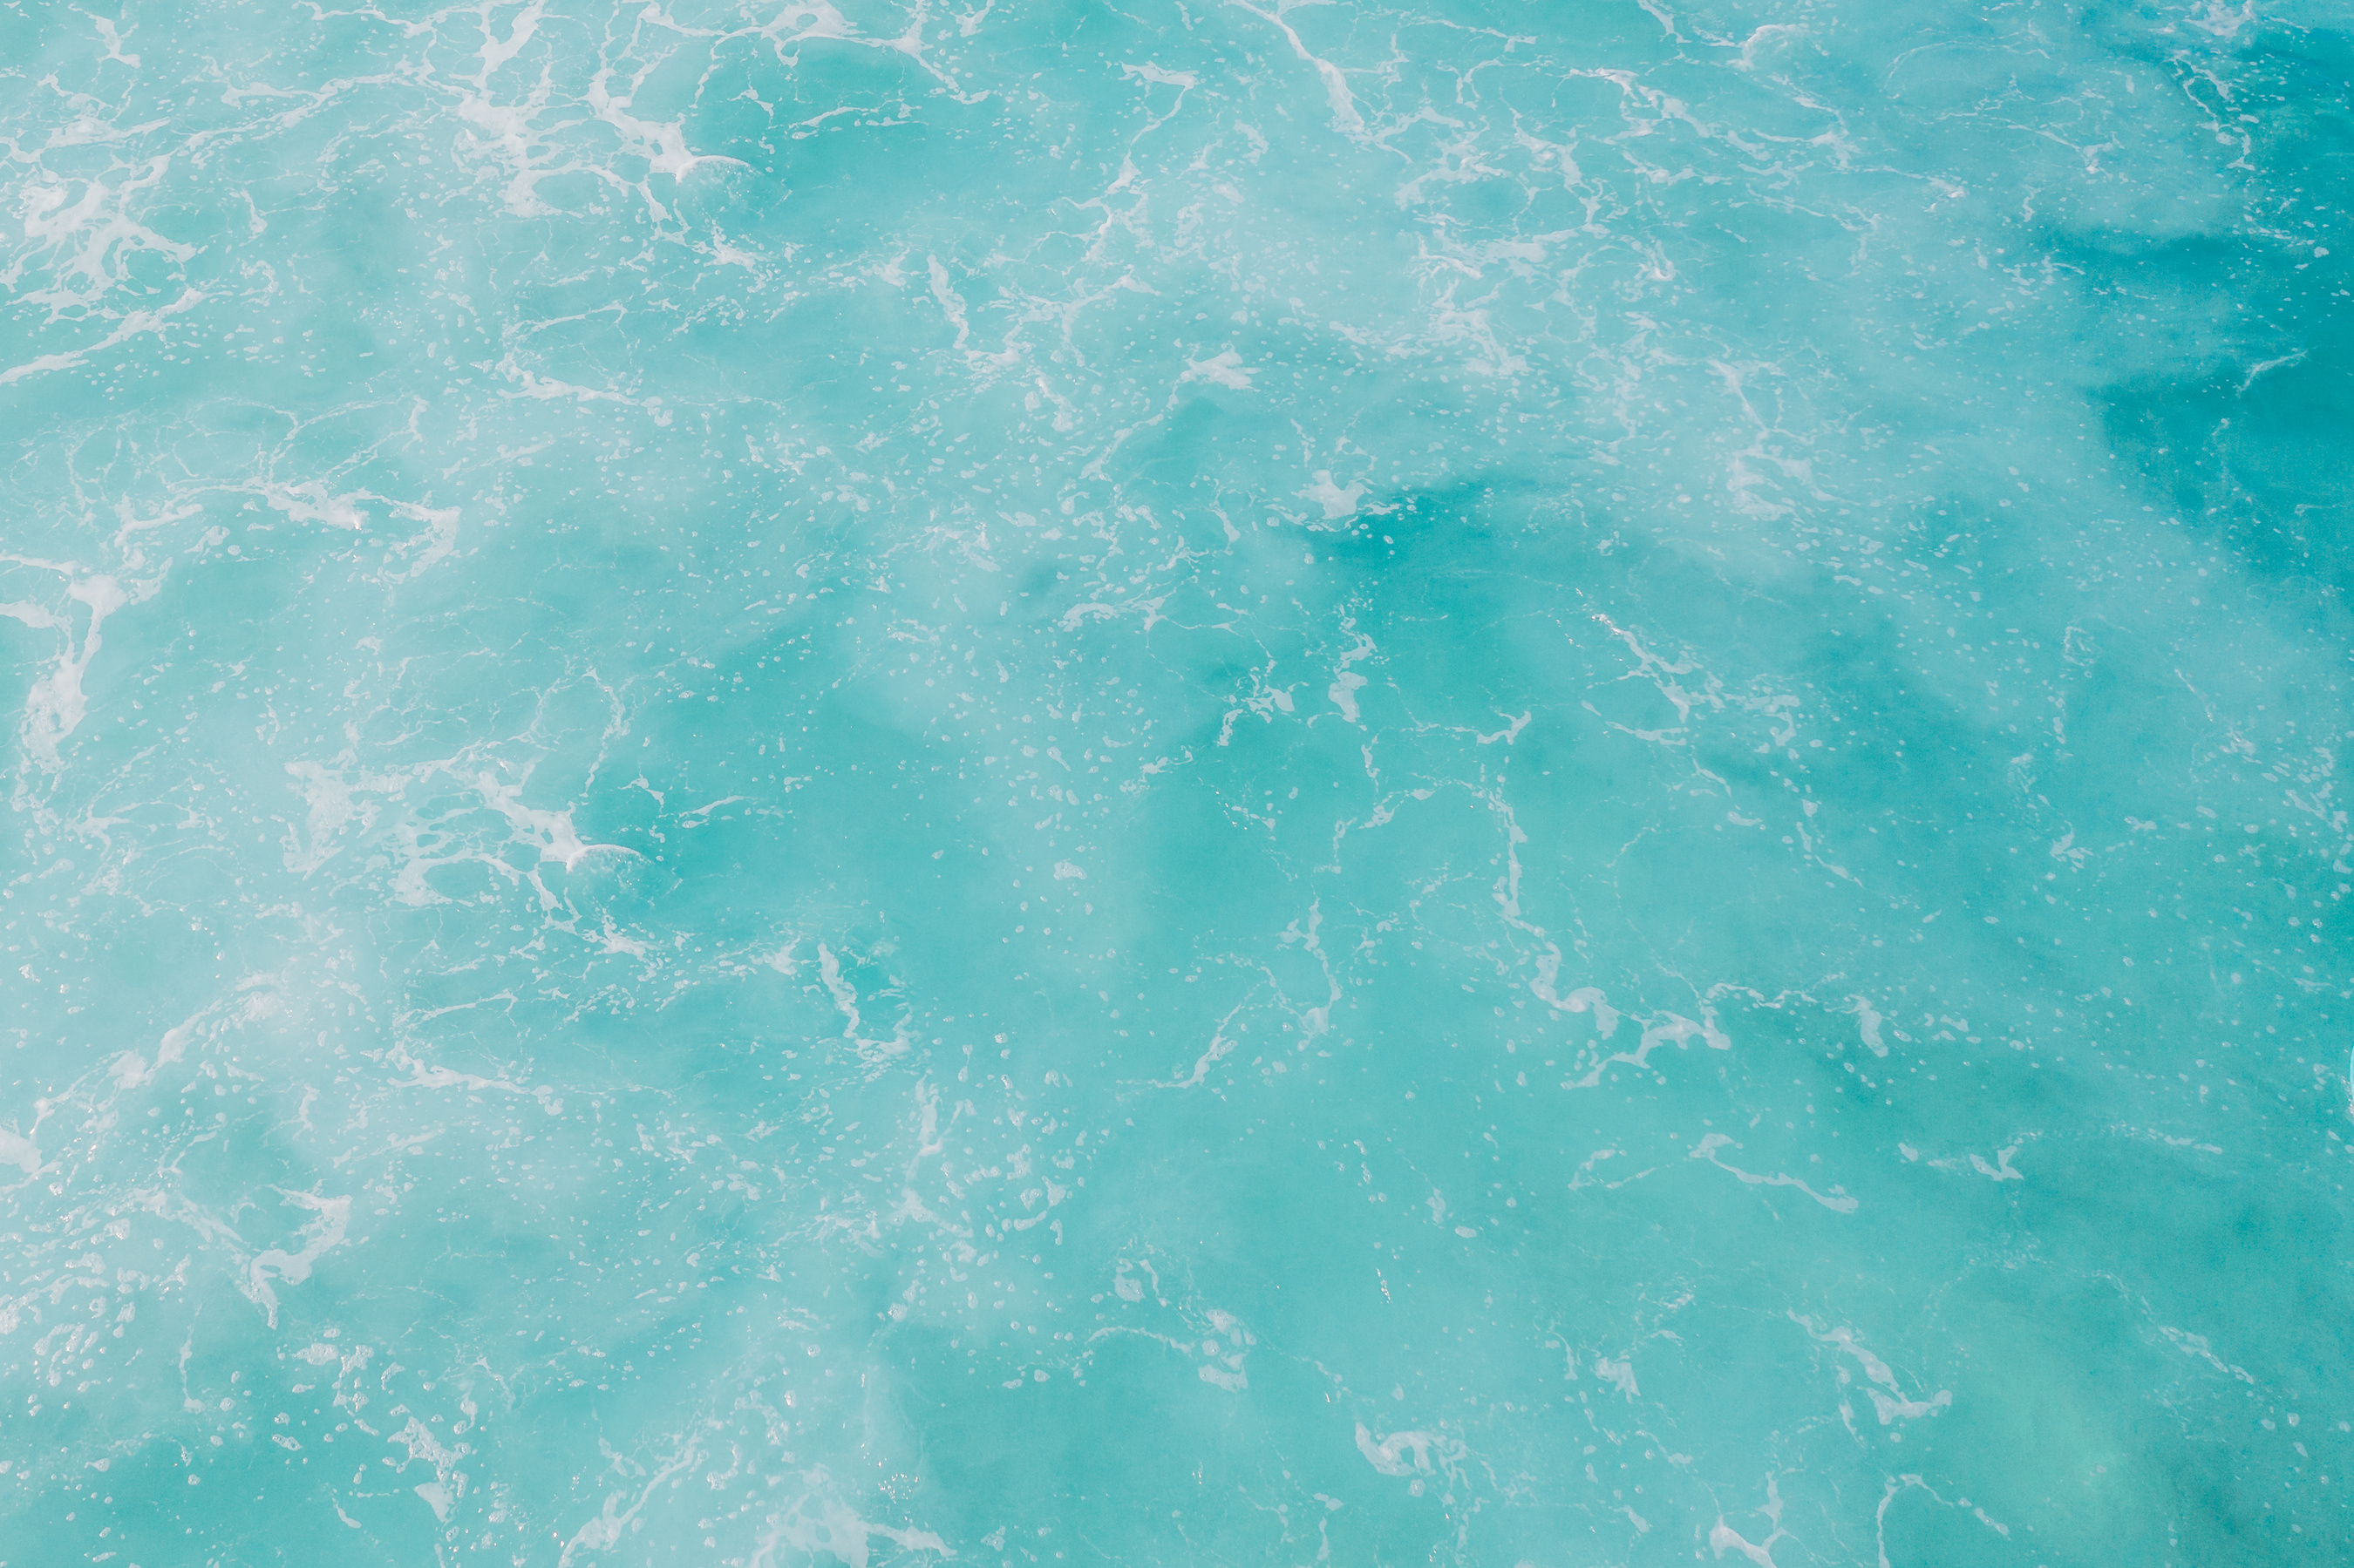  A Close-Up Shot of Turquoise Water